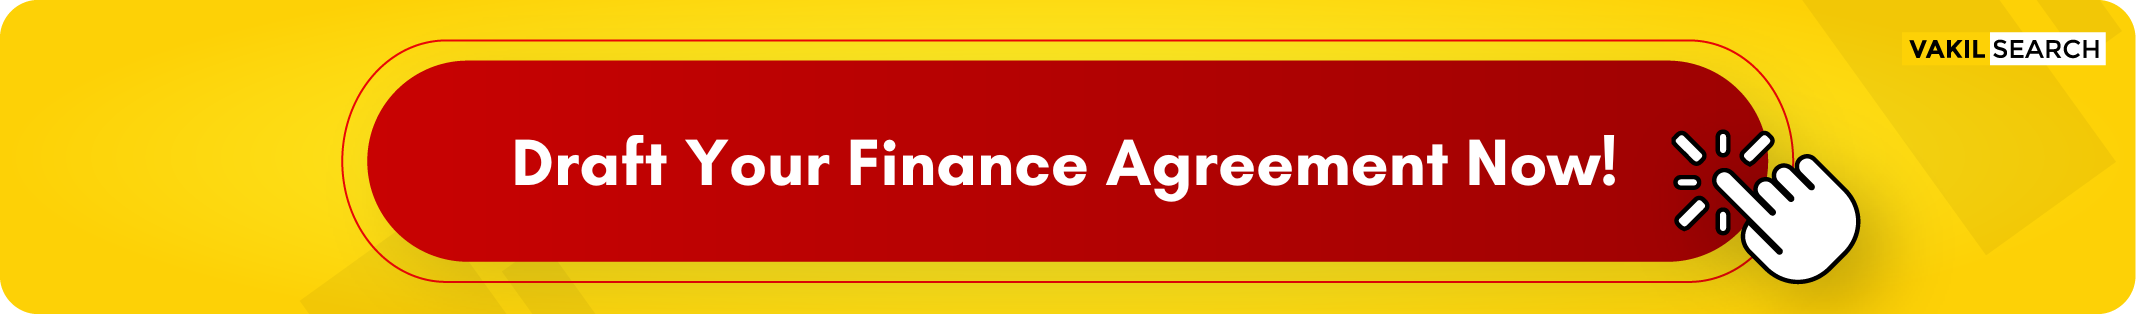 draft your finance agreement